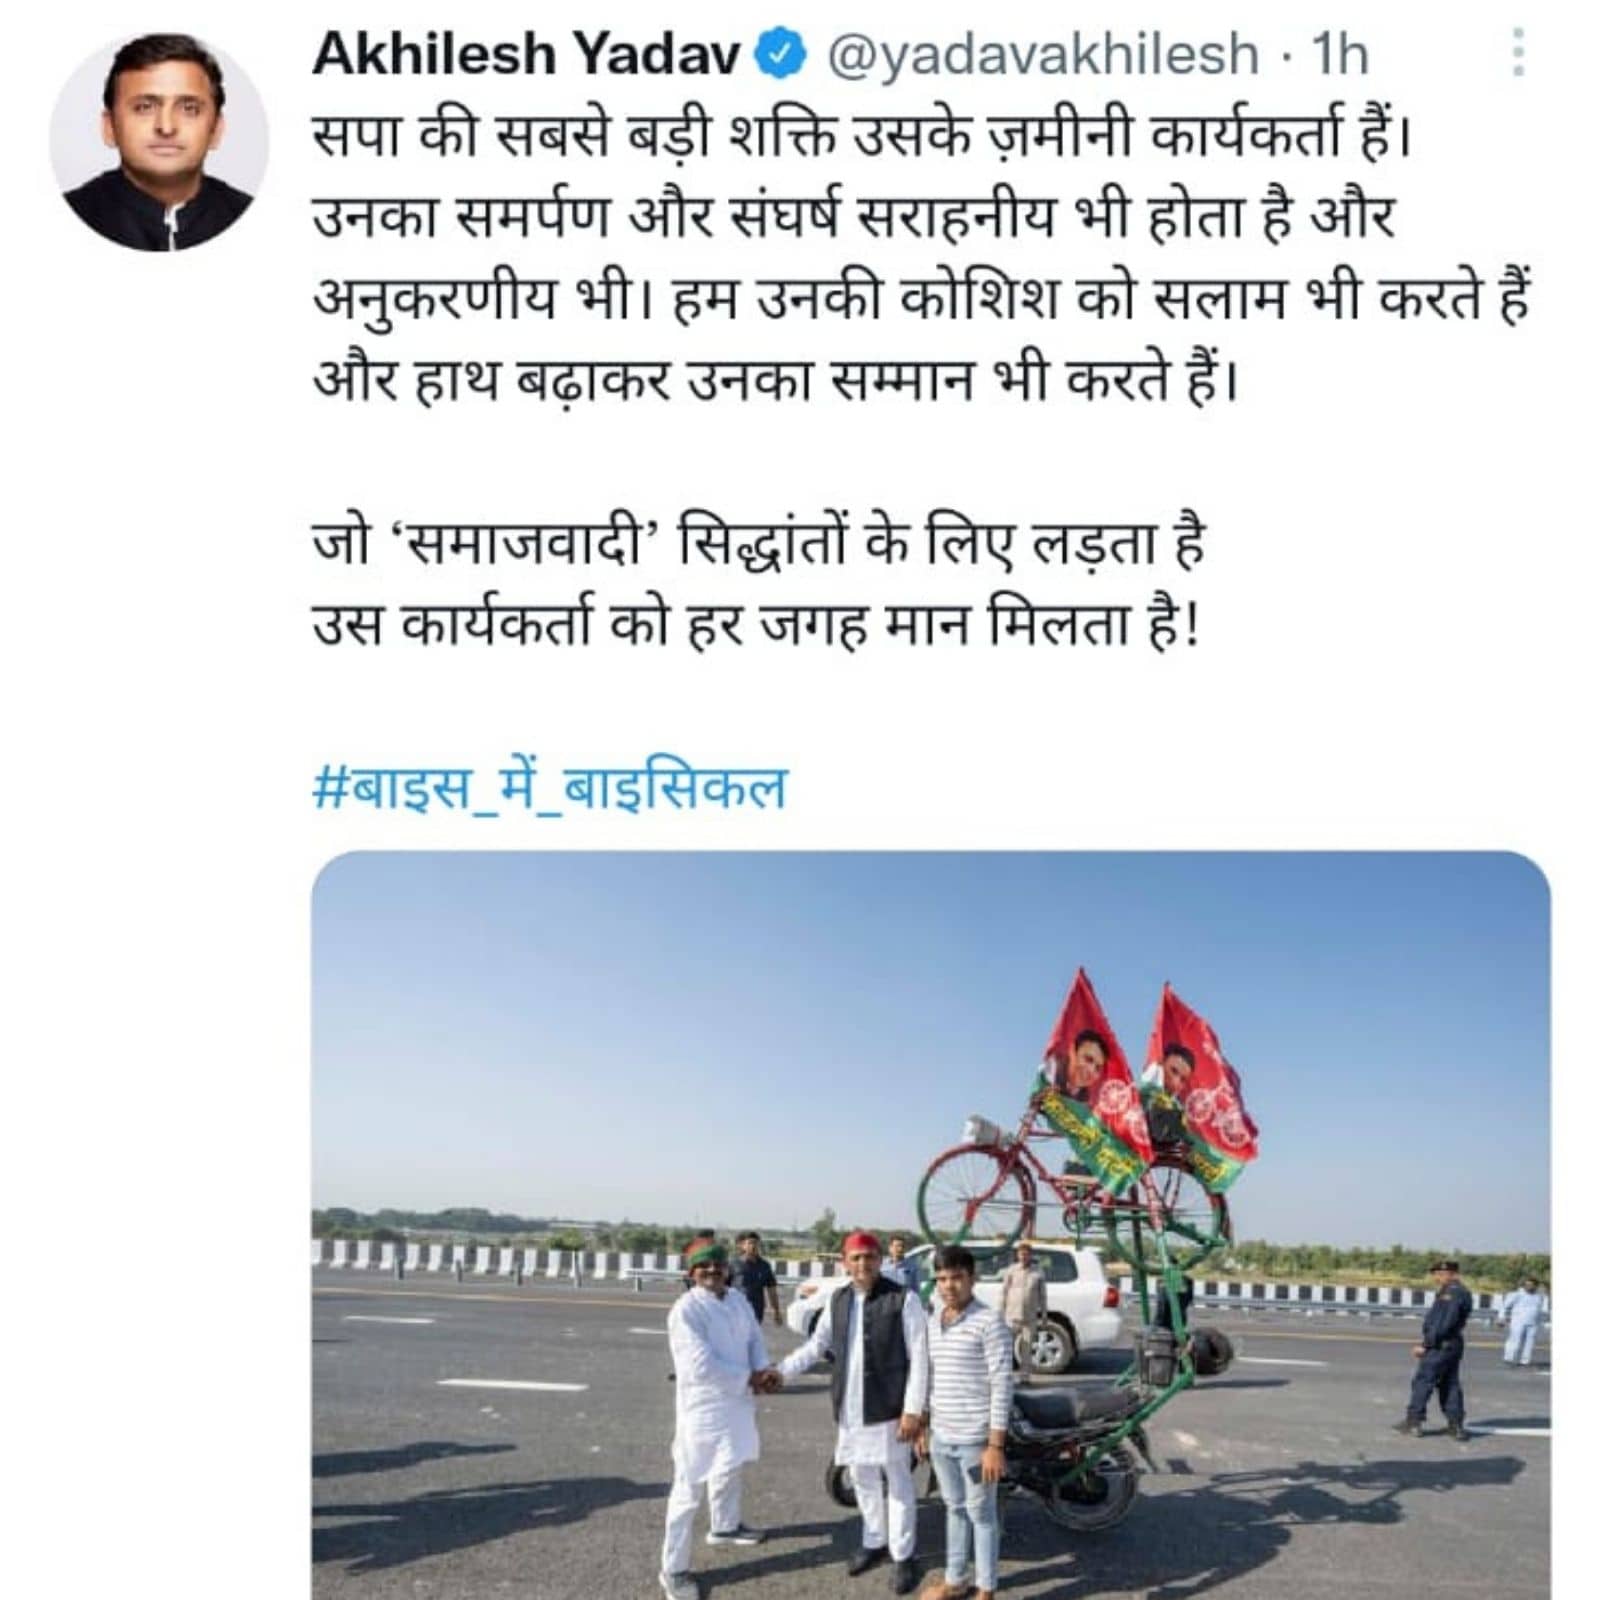 UP Election 2022: Akhilesh Yadav said- SP&#39;s biggest power is its grassroot  workers, share photo